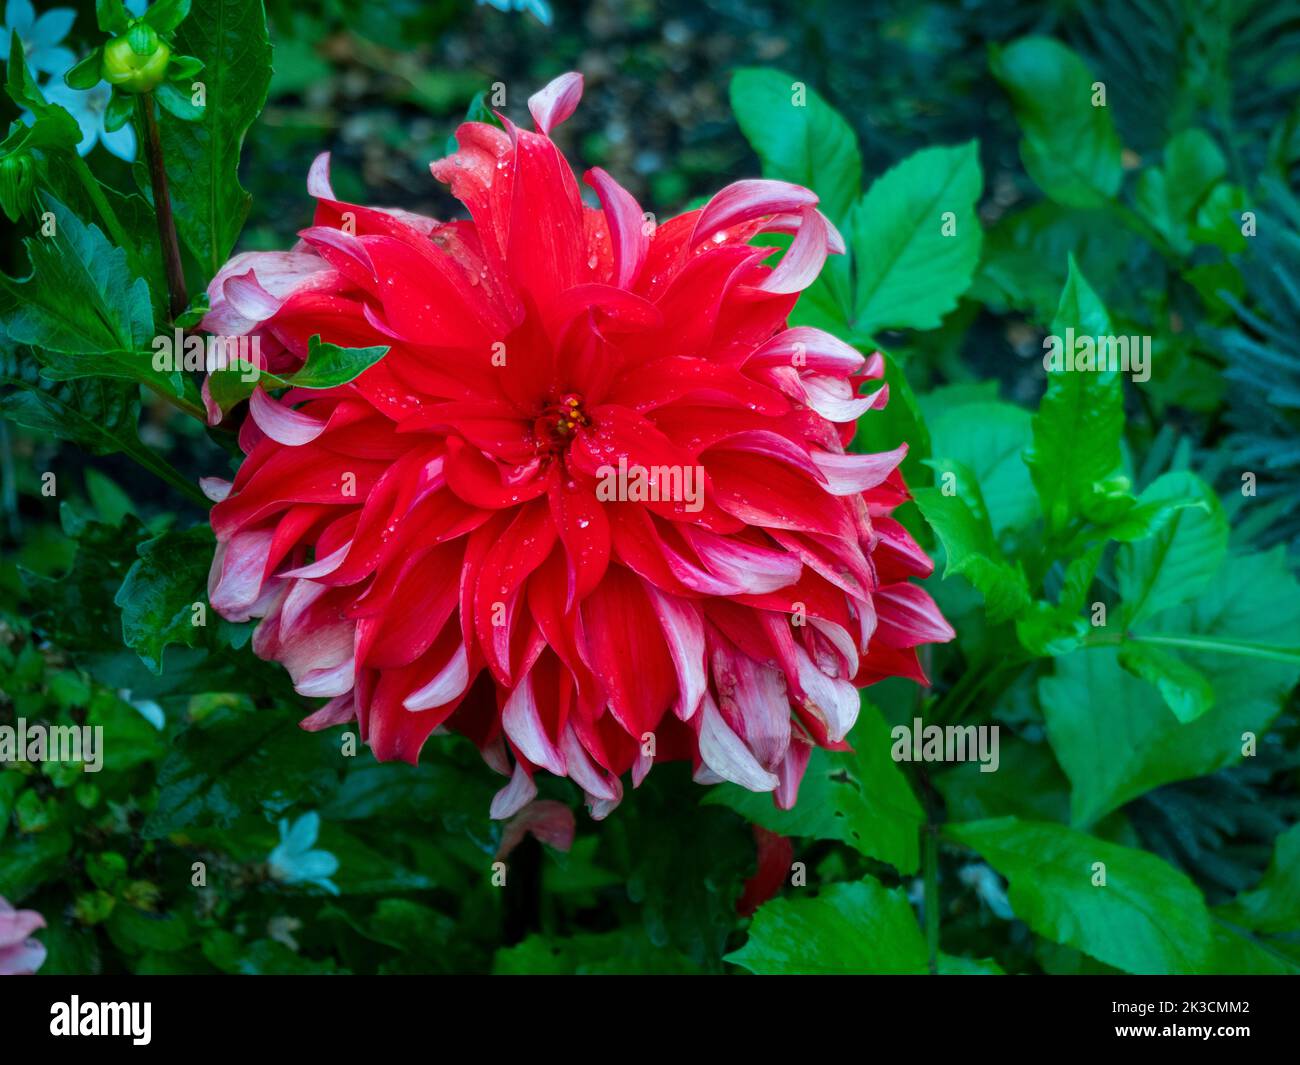 Dahlia 'Red Labyrinth'; detail of a single bloom showing the twisted two tone red petals. Stock Photo